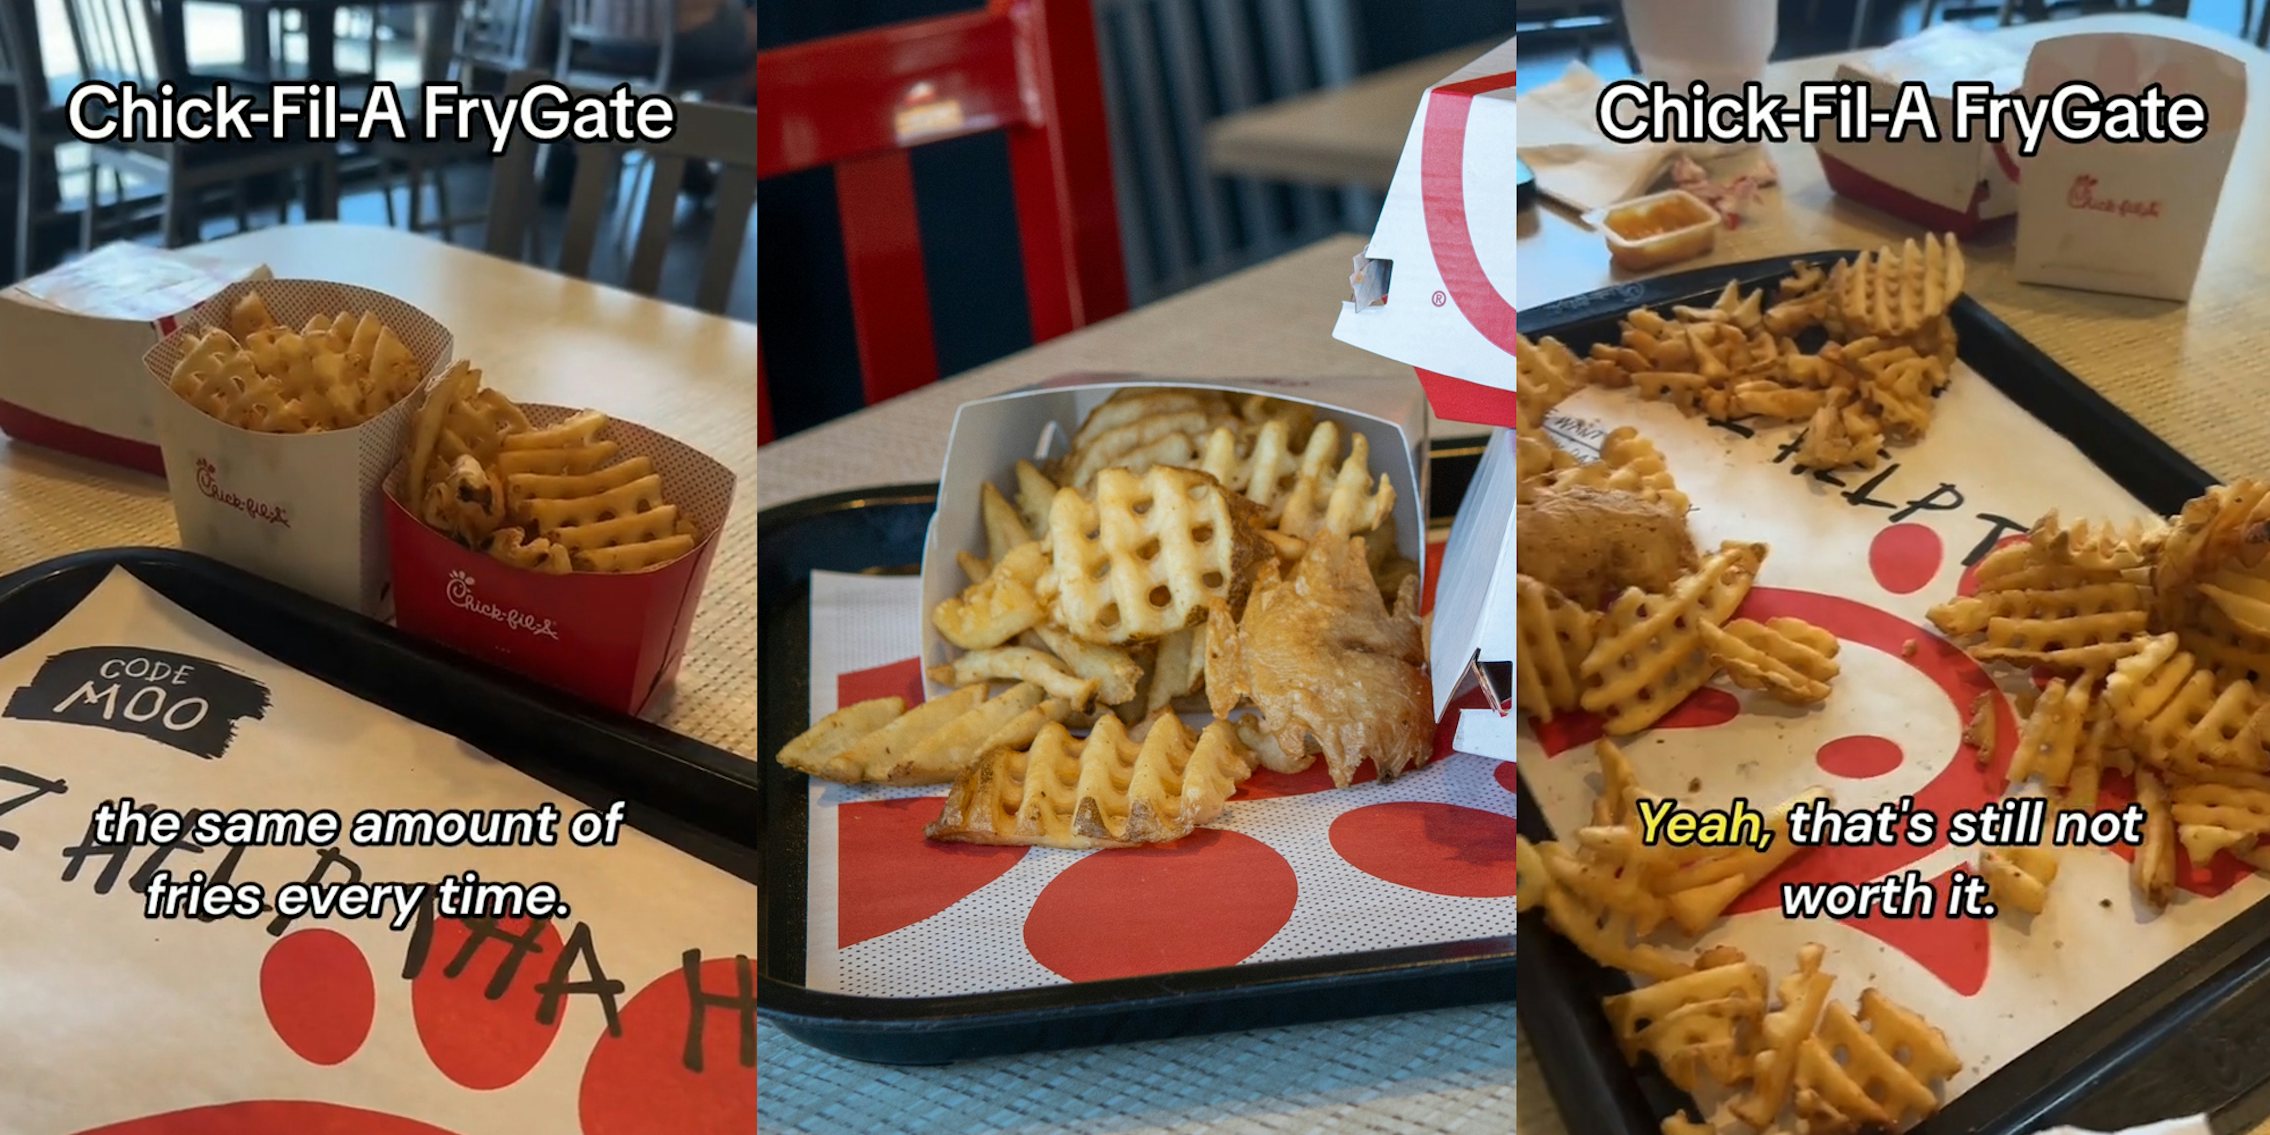 Chick-Fil-A fries on tray with caption 'Chick-Fil-A FryGate the same amount of fries, every time.' (l) Chick-Fil-A fries on tray at restaurant (c) Chick-Fil-A fries on tray with caption 'Chick-Fil-A FryGate yeah, that's still not worth it.' (r)